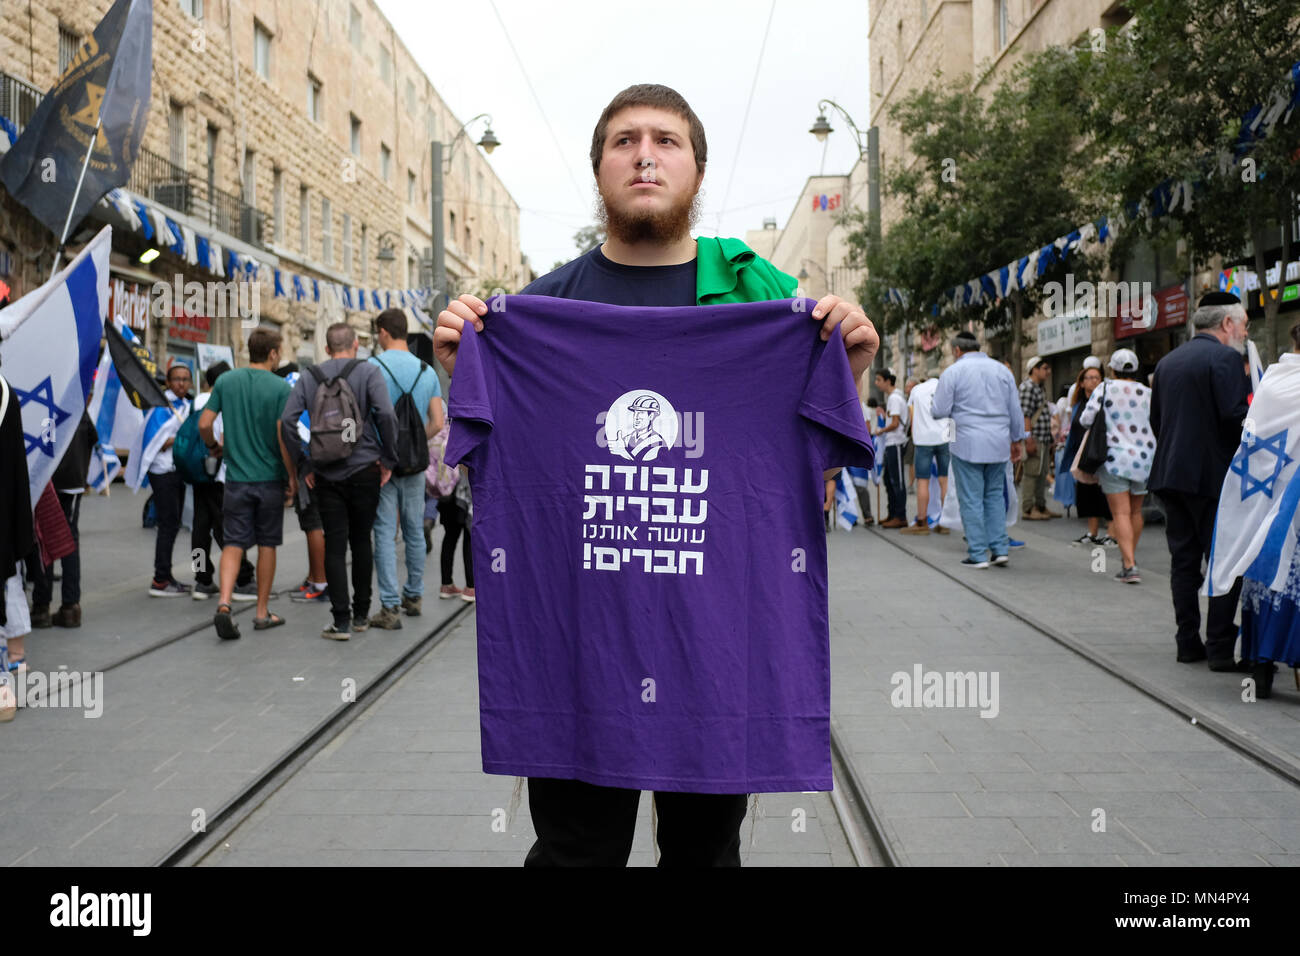 An Israeli right-wing activist holds a T shirt with slogan in Hebrew which reads 'Hebrew work makes us friends' encouraging employers to hire Jewish laborers during 51st anniversary of Jerusalem's reunification on 13th May 2018. Israel Stock Photo